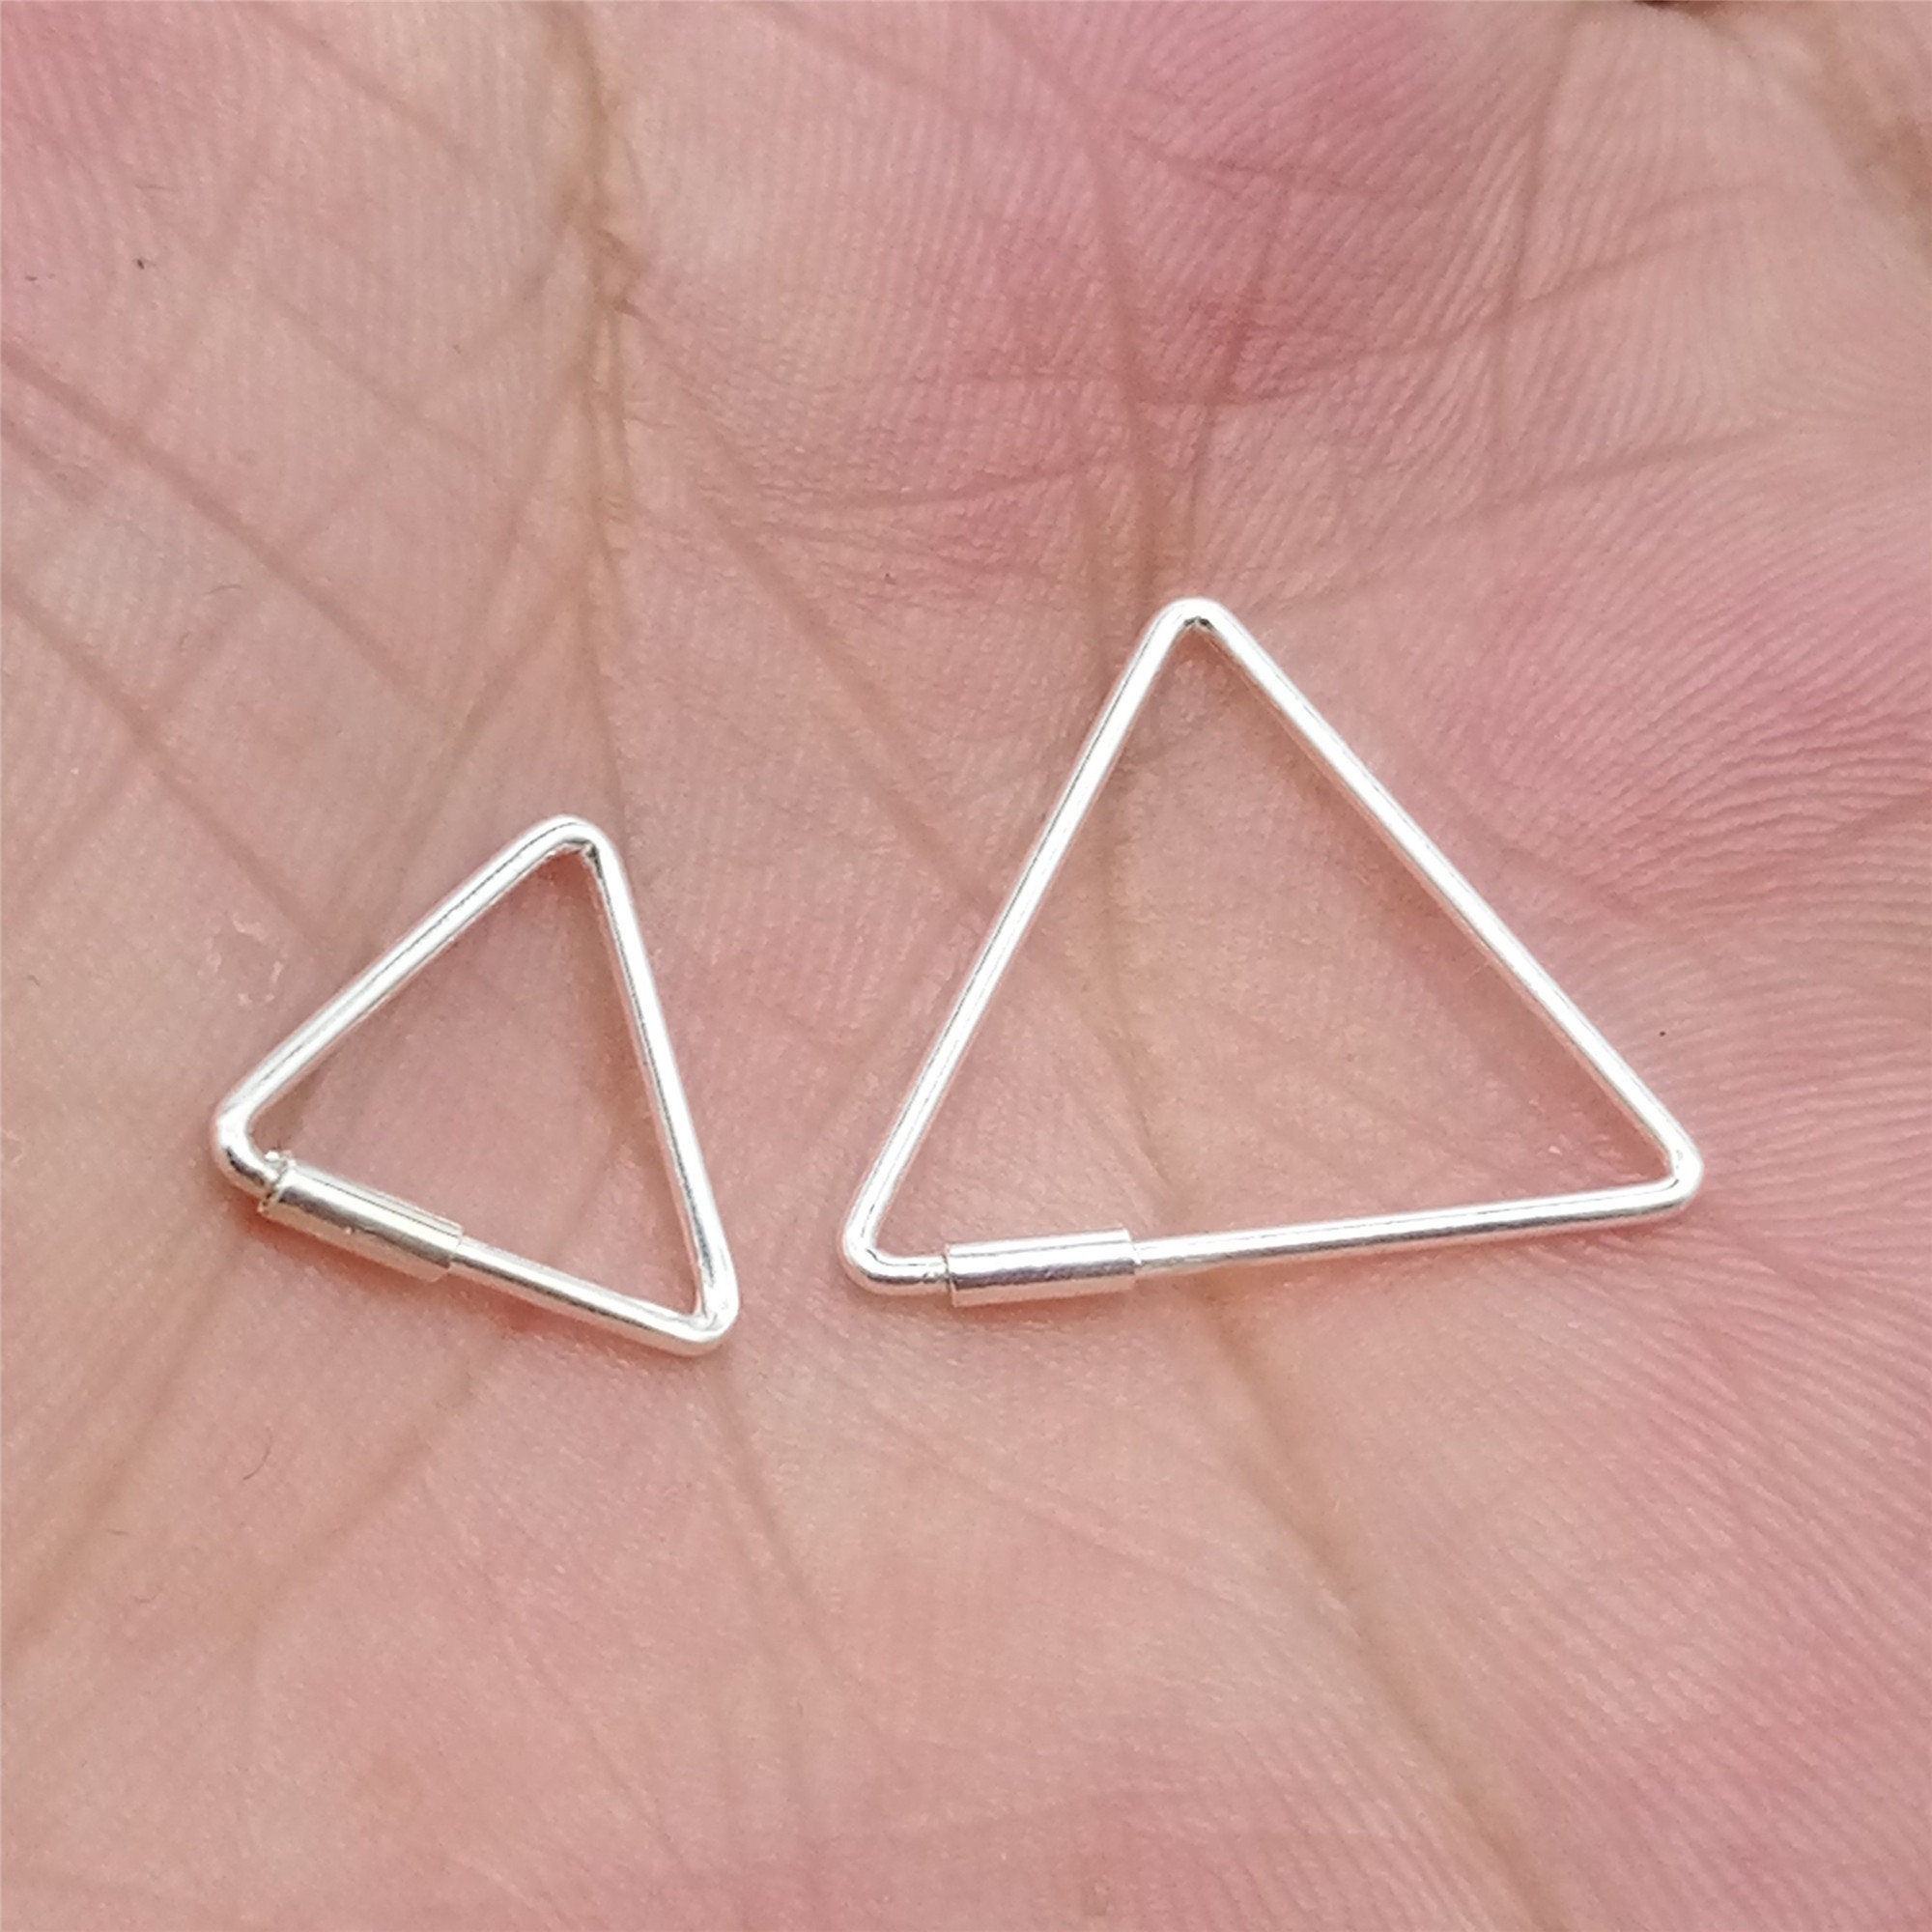 5 Pairs Sterling Silver Triangle Earring Hoops 925 Silver Ear - Etsy